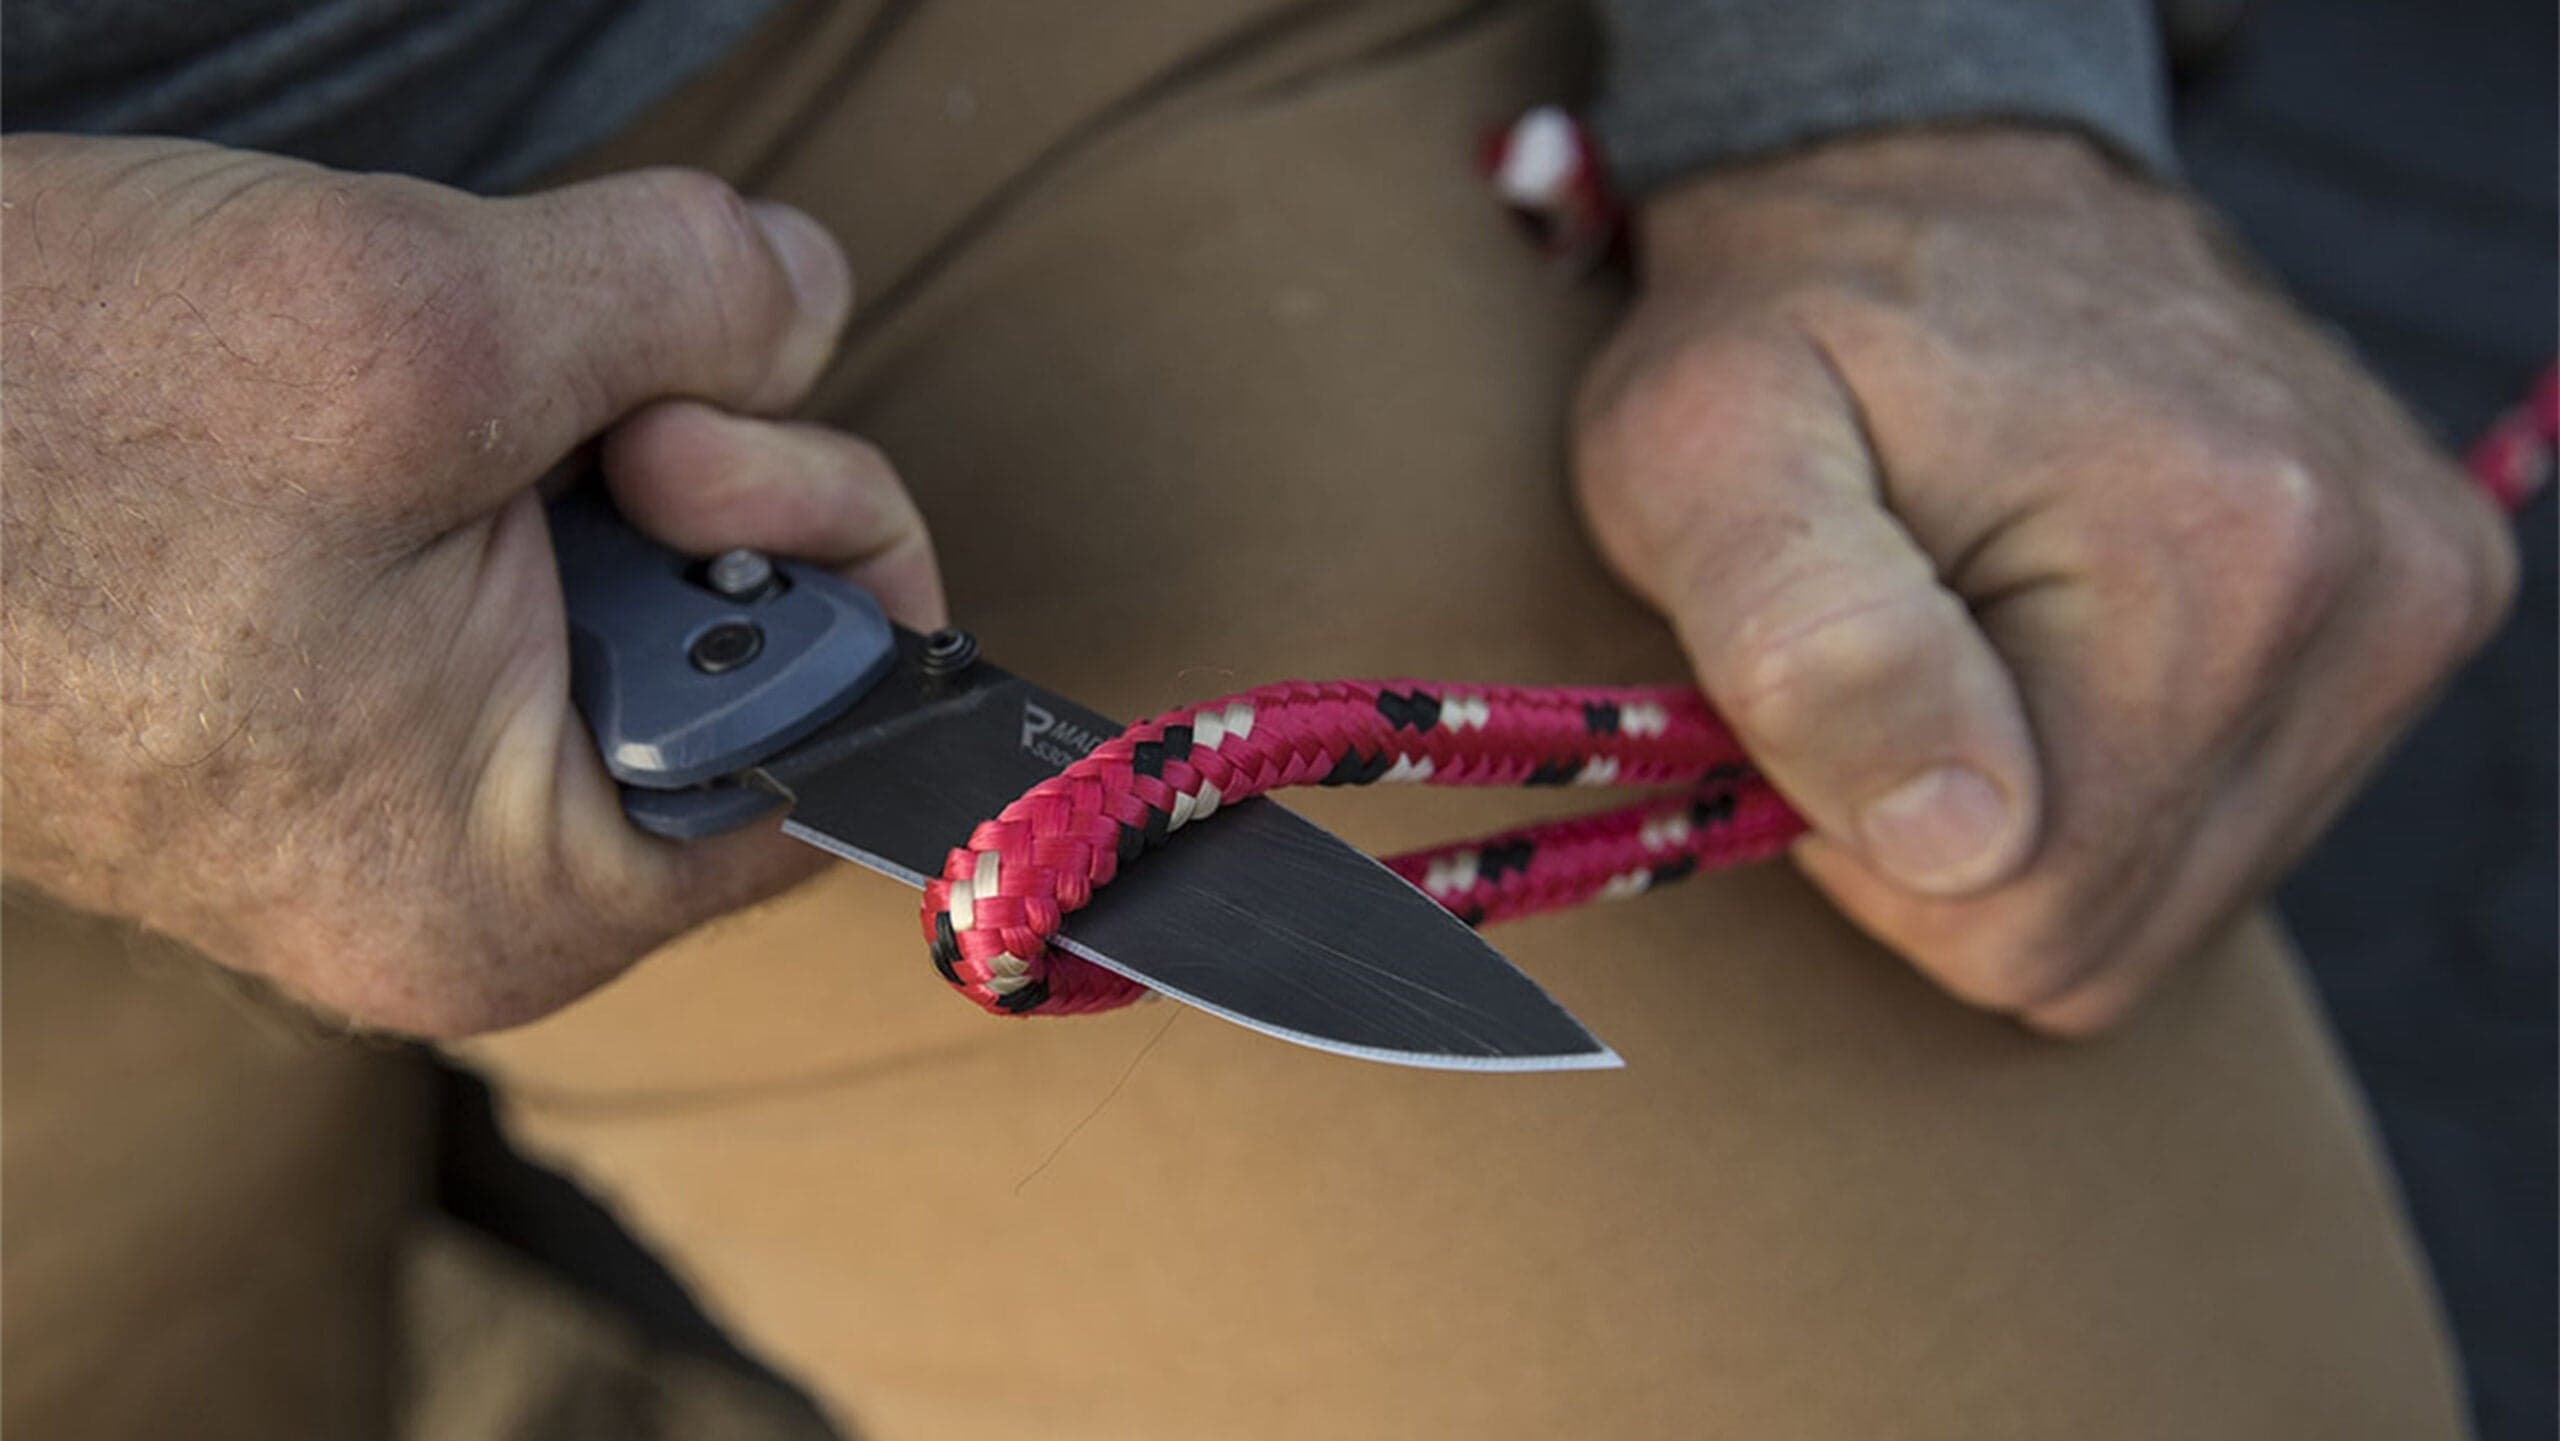 Deal Alert: Gerber Knives Are 25% Off at REI Right Now